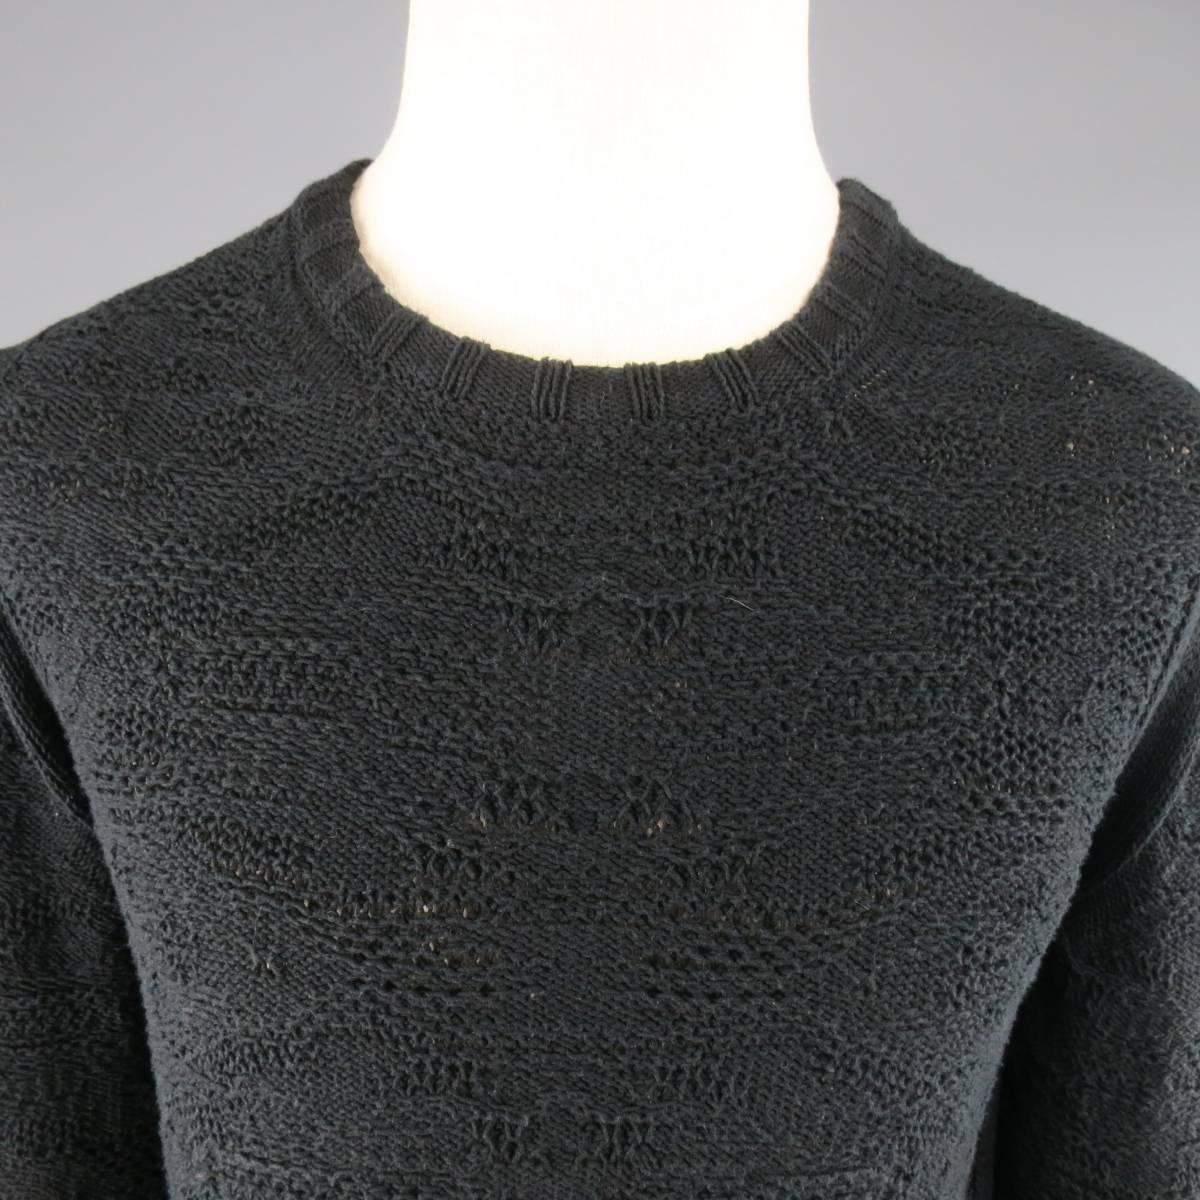 SILENT by DAMIR DOMA pullover sweater in a textured soft navy black knit featuring a crewneck, ribbed cuffs, and side slits.
 
Excellent Pre-Owned Condition.
No Tag.
 
Measurements:
 
Shoulder: 19 in.
Chest: 40 in.
Sleeve: 26 in.
Length: 32 in.